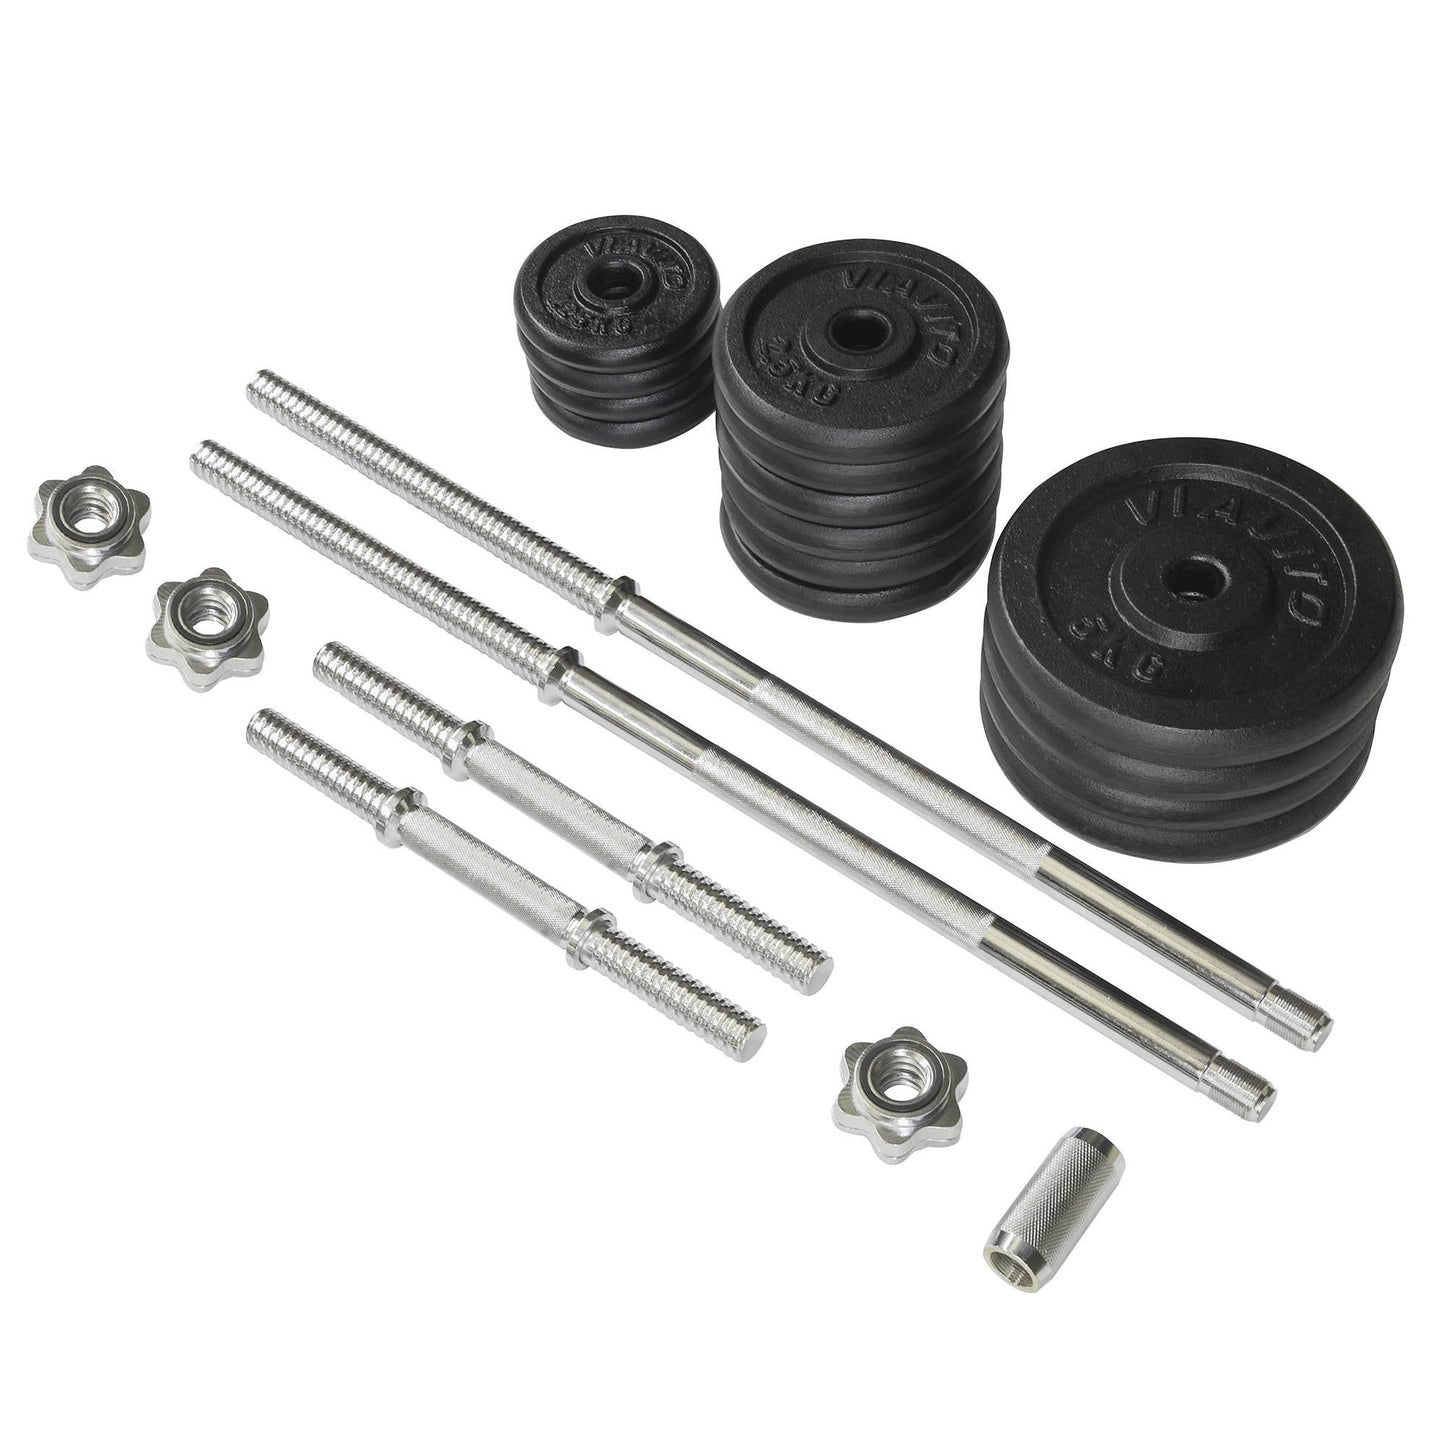 |Viavito 50kg Black Cast Iron Barbell and Dumbbell Set - Parts|